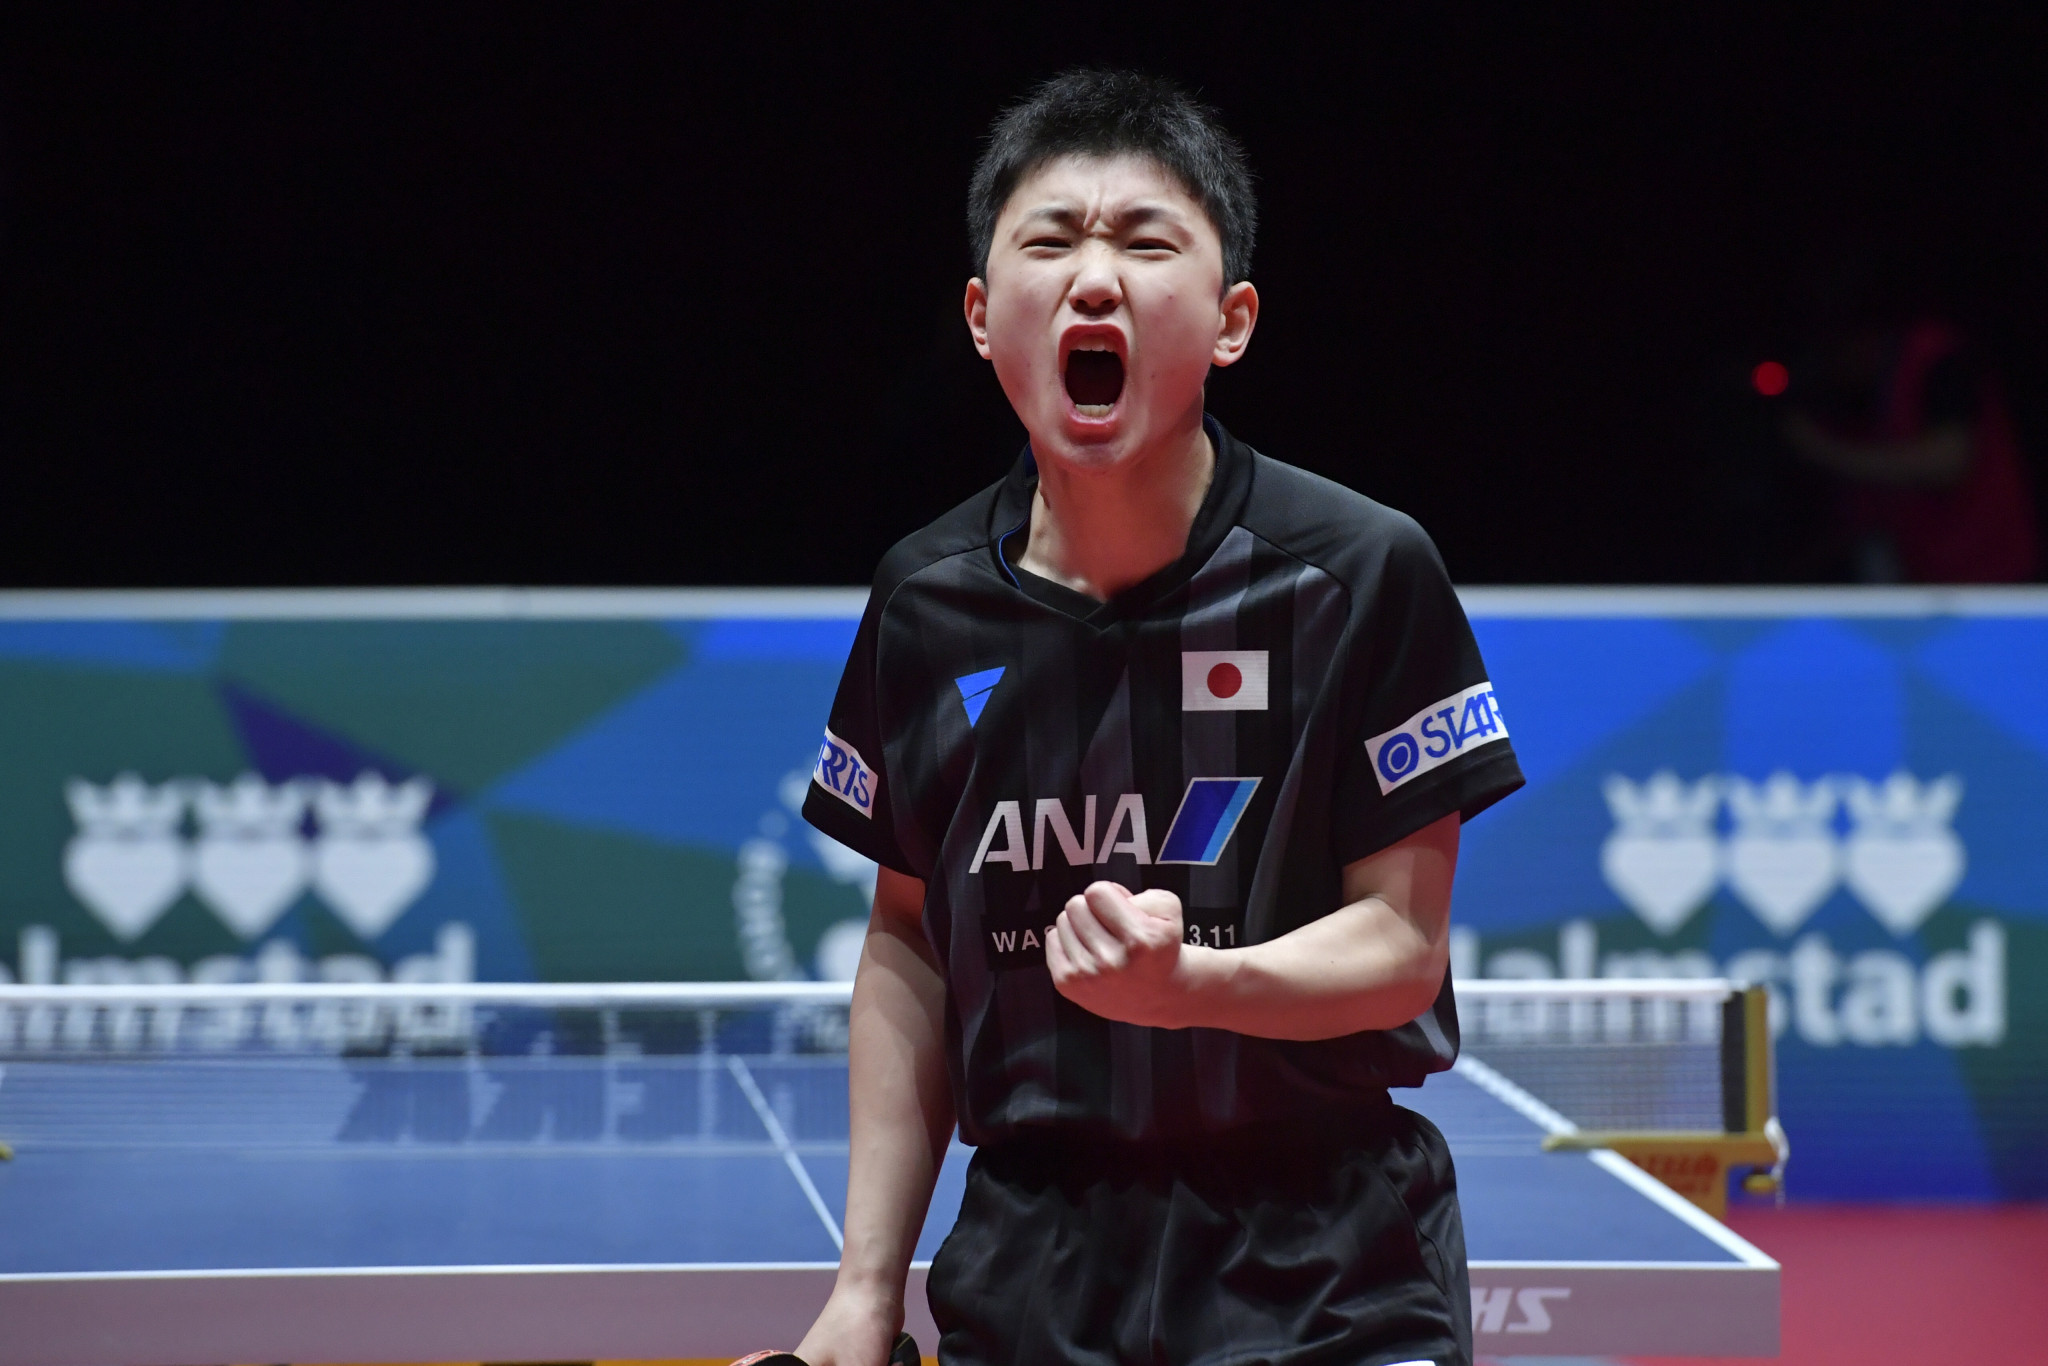 Tomokazu Harimoto will grab home fans' attention at the Japan Open ©Getty Images